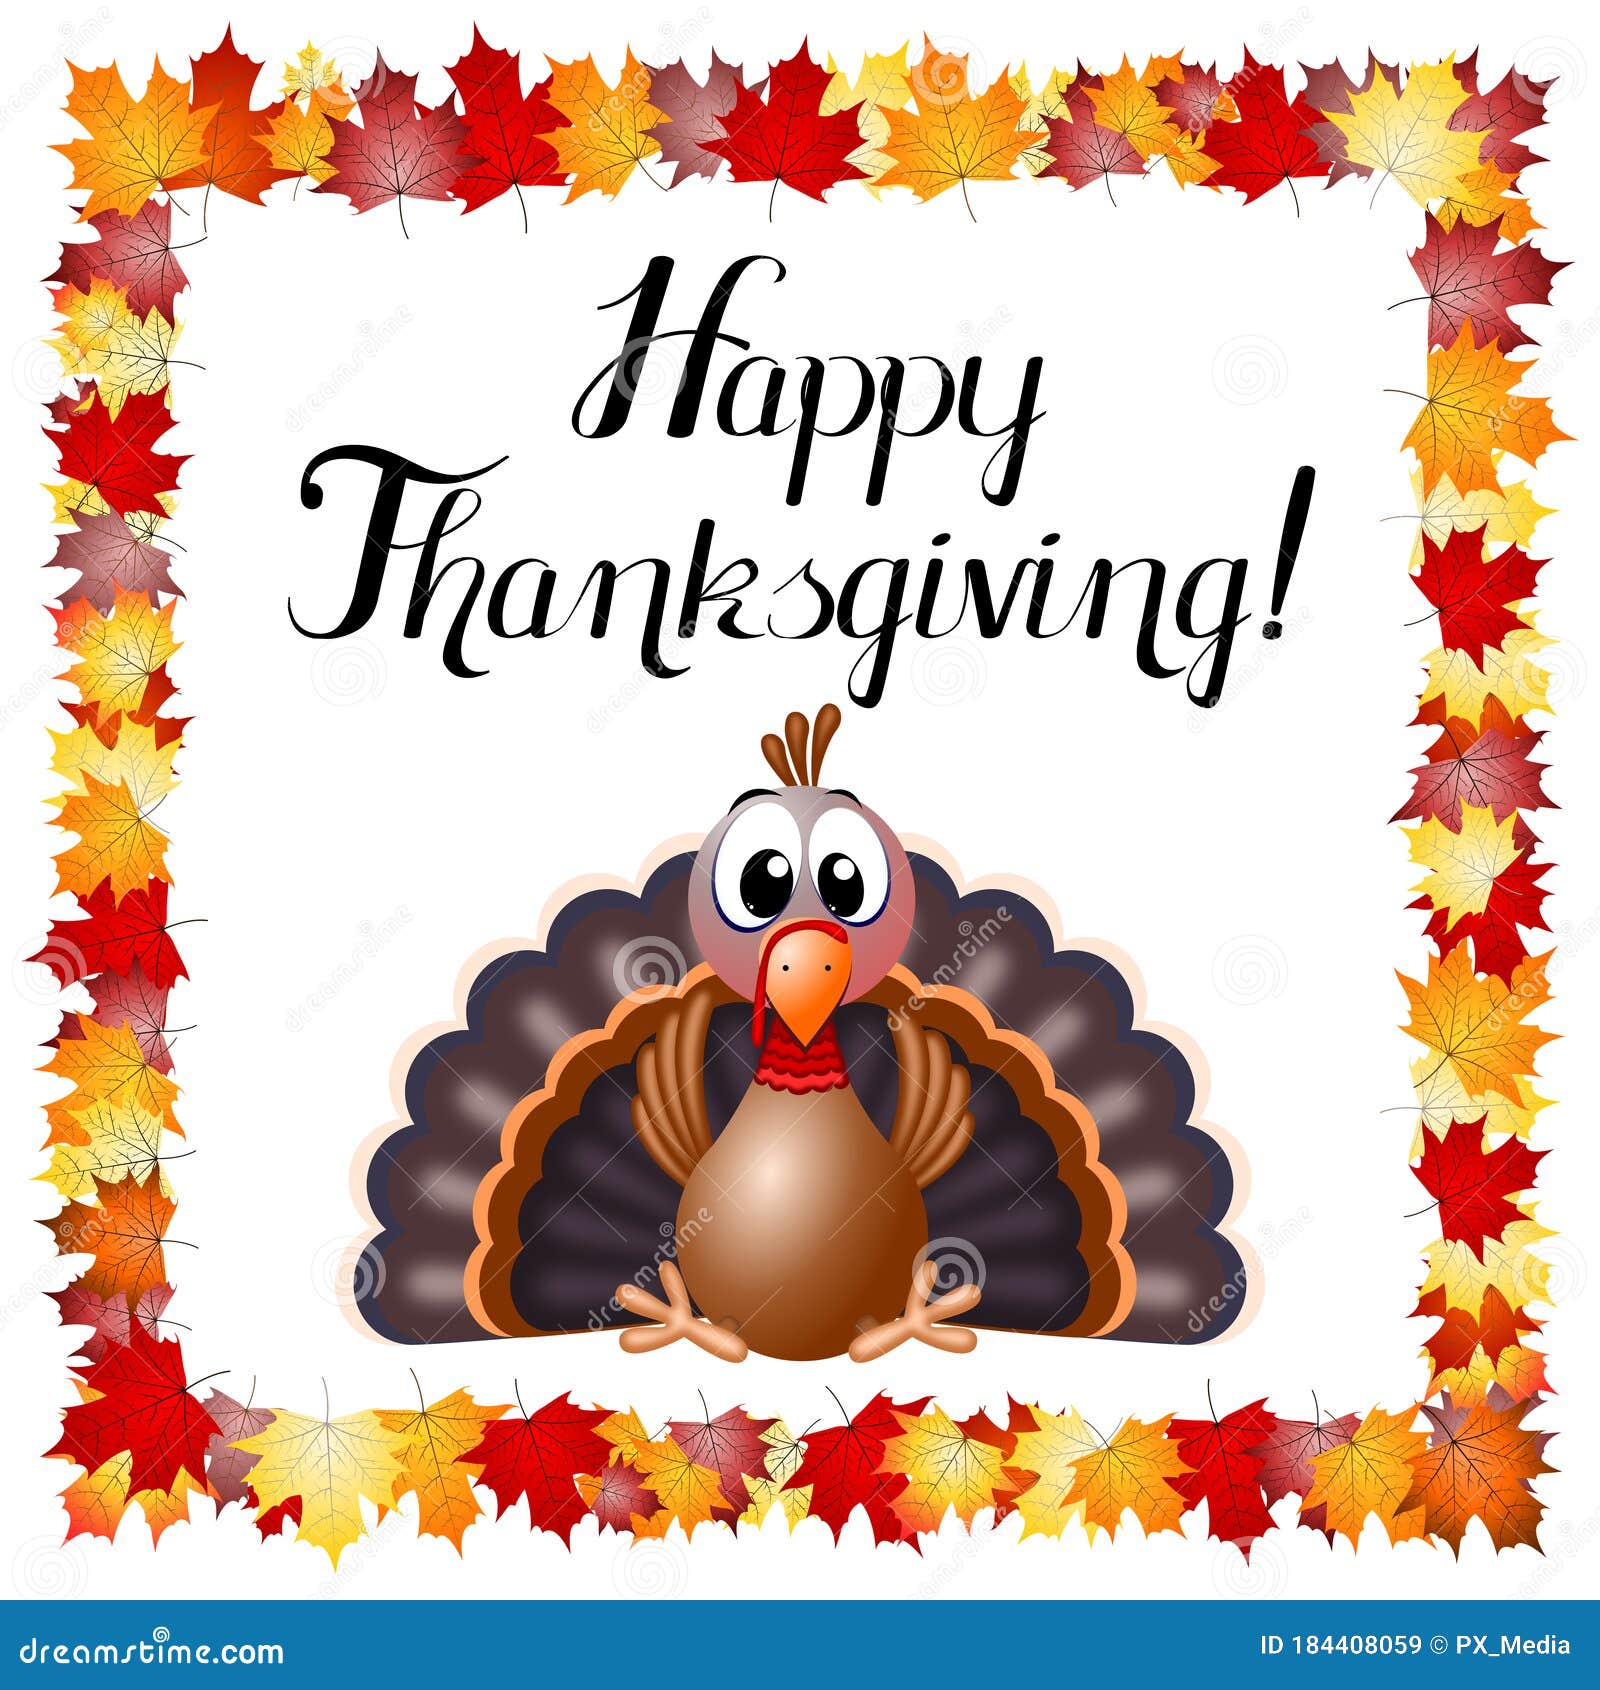 Happy Thanksgiving Card - Funny Cartoon Turkey, Fall Leaves Stock  Illustration - Illustration of character, background: 184408059